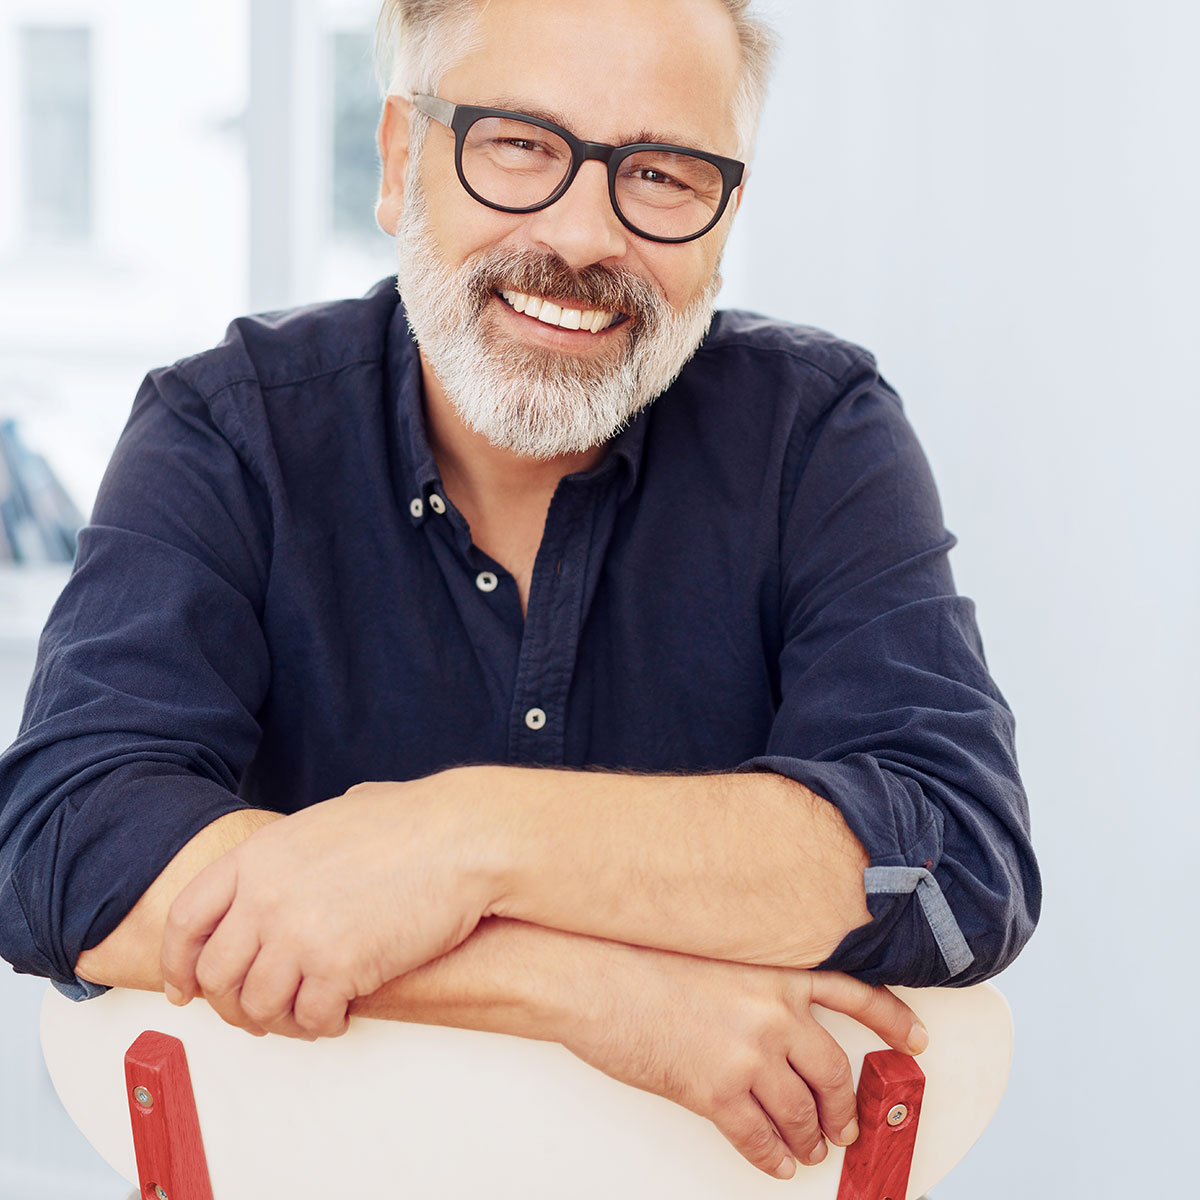 Man with glasses sitting on a chair